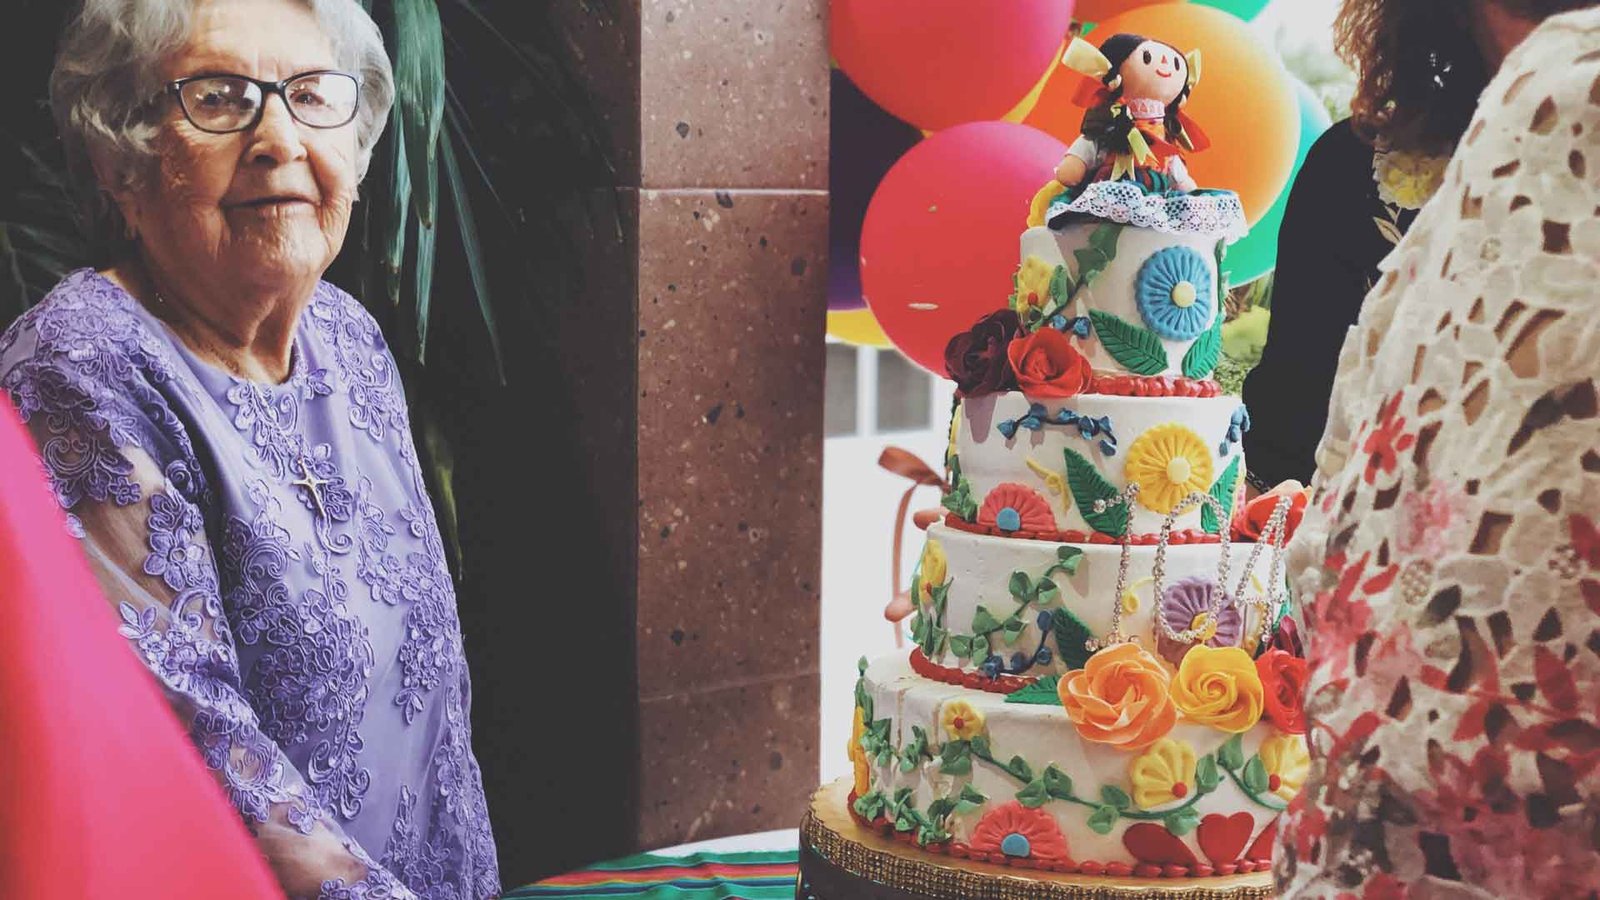 5 Things You Can Do To Make Your Grandma Happy On Her Birthday